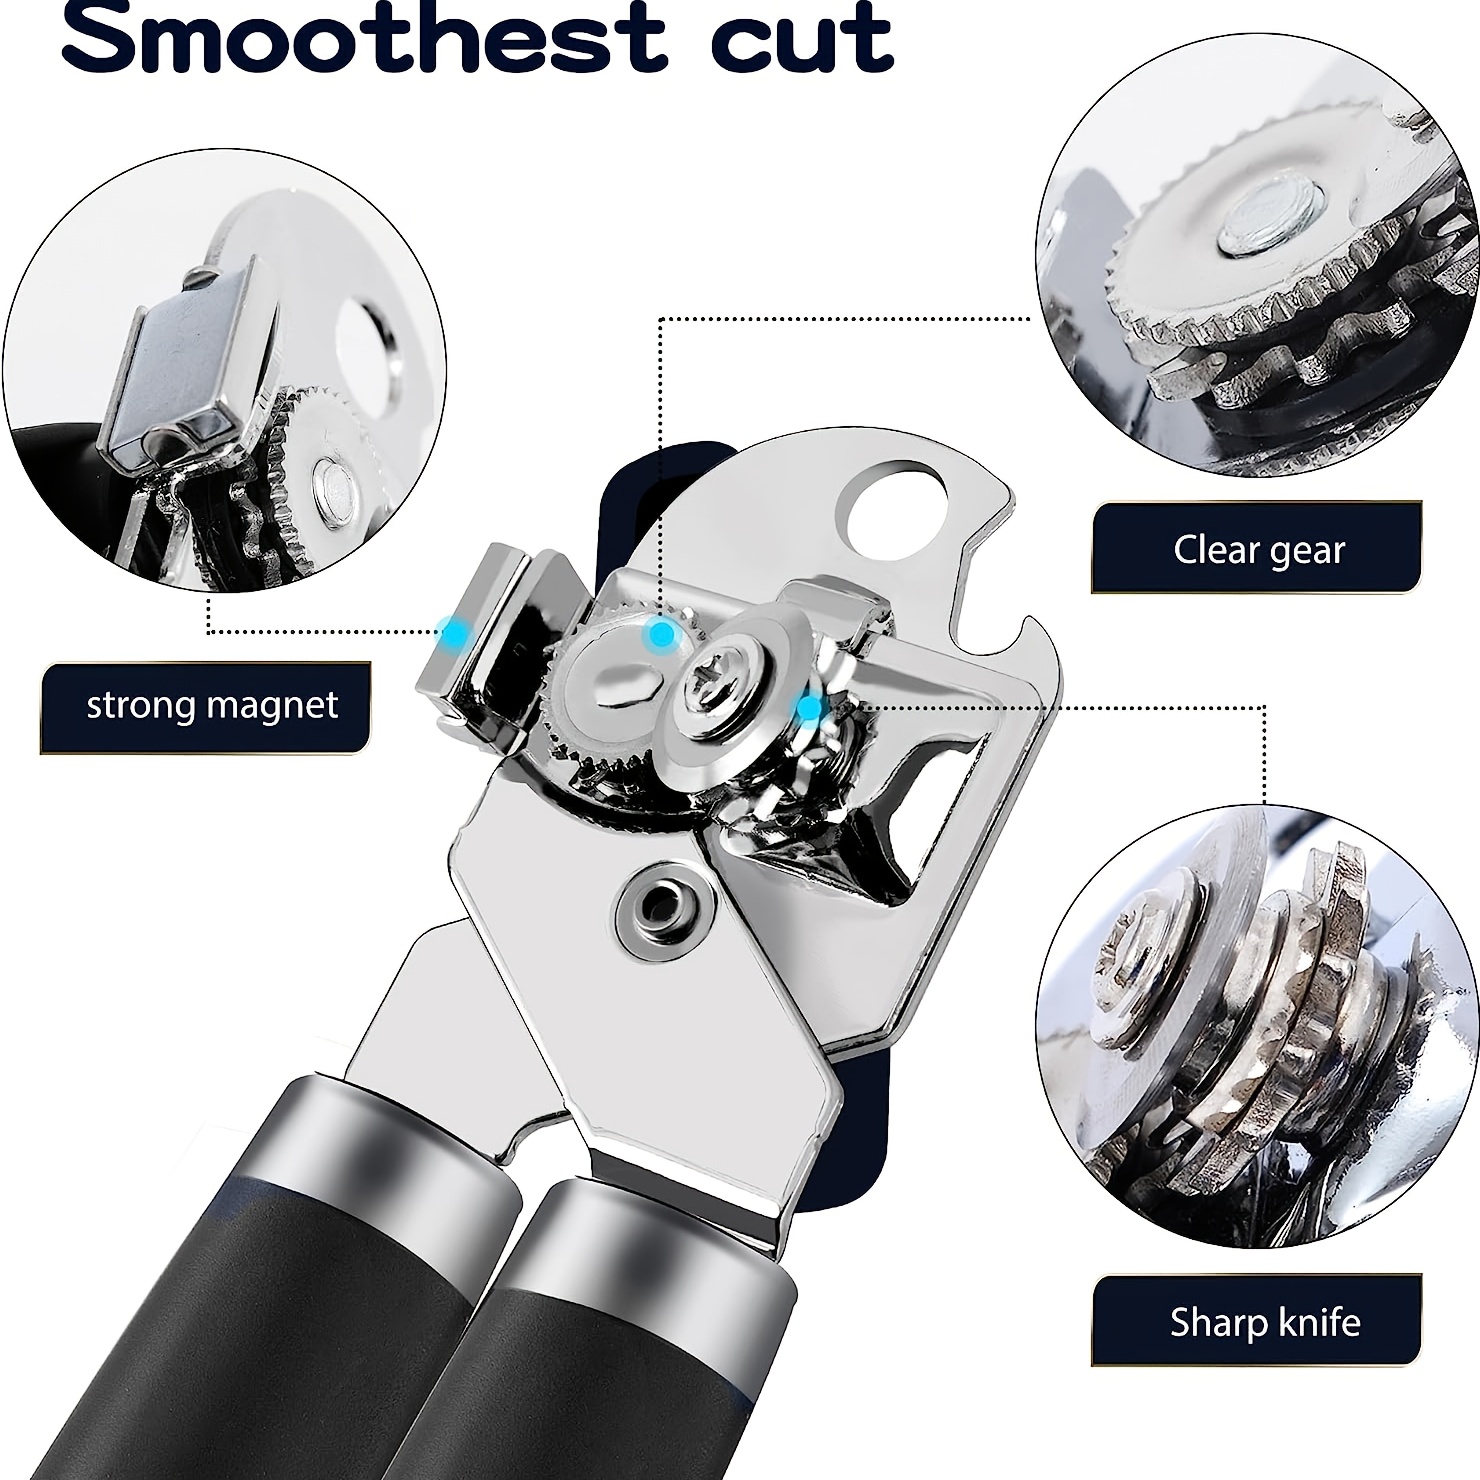 Can Opener Manual Handheld Strong Manual Can Opener Smooth Edge